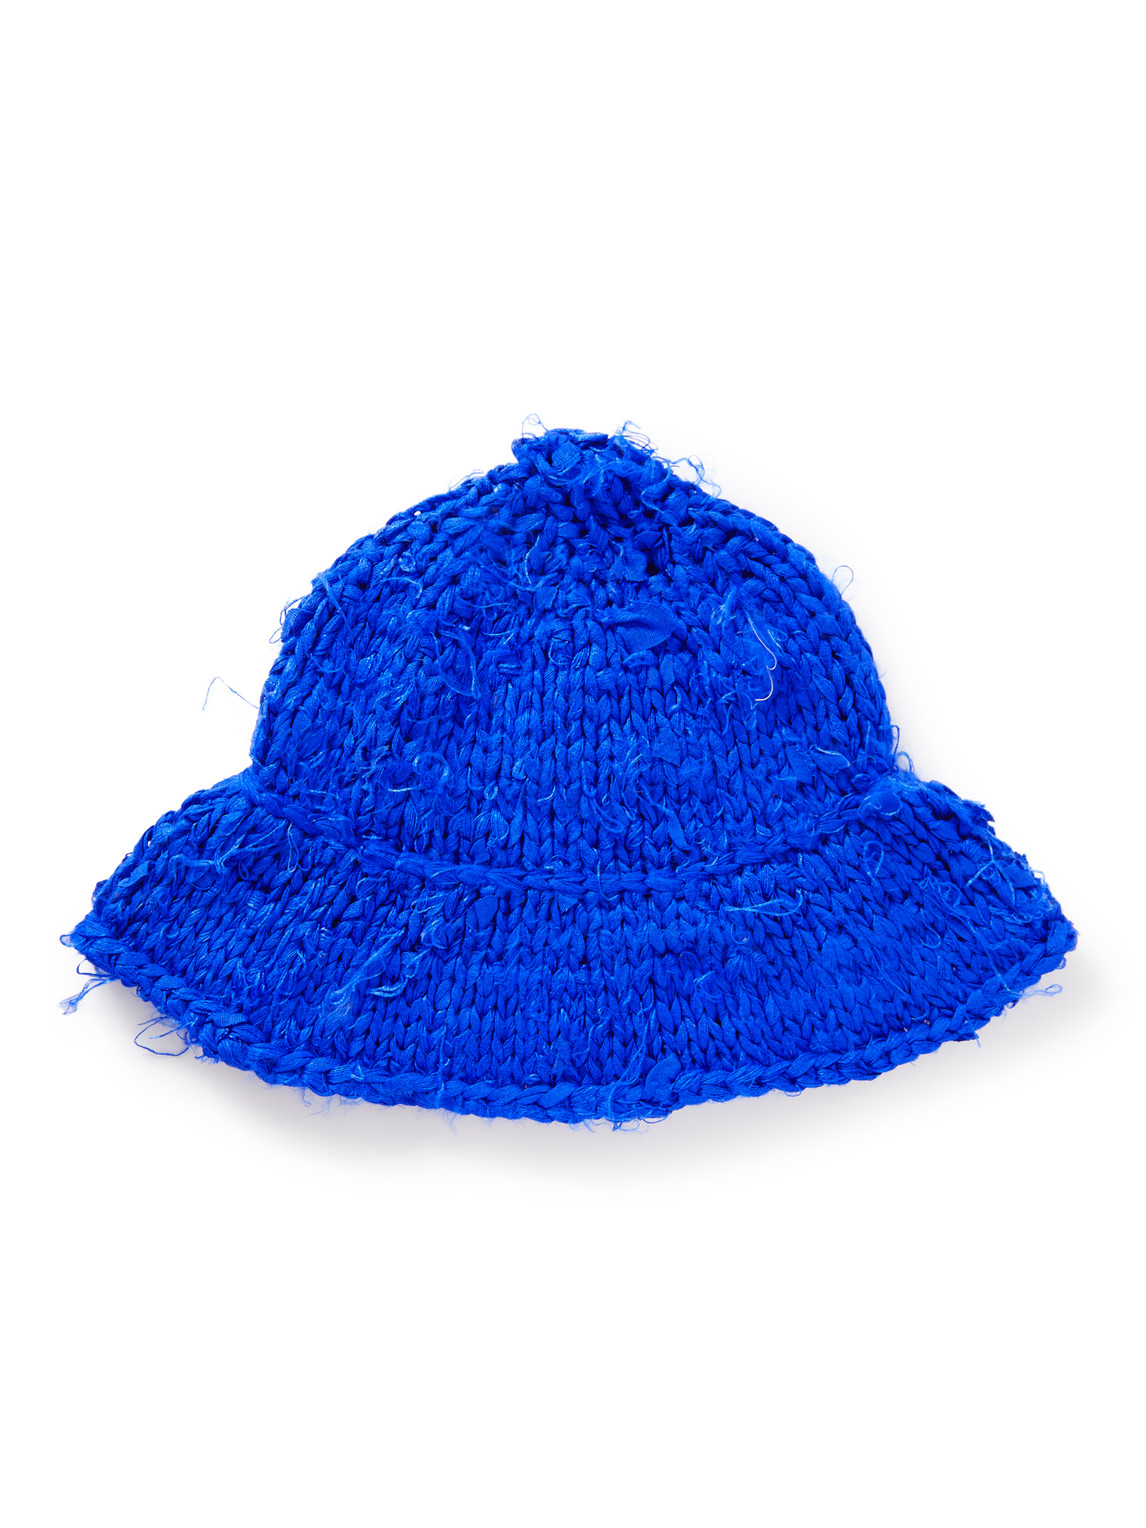 Distressed Knitted Silk Bucket Hat